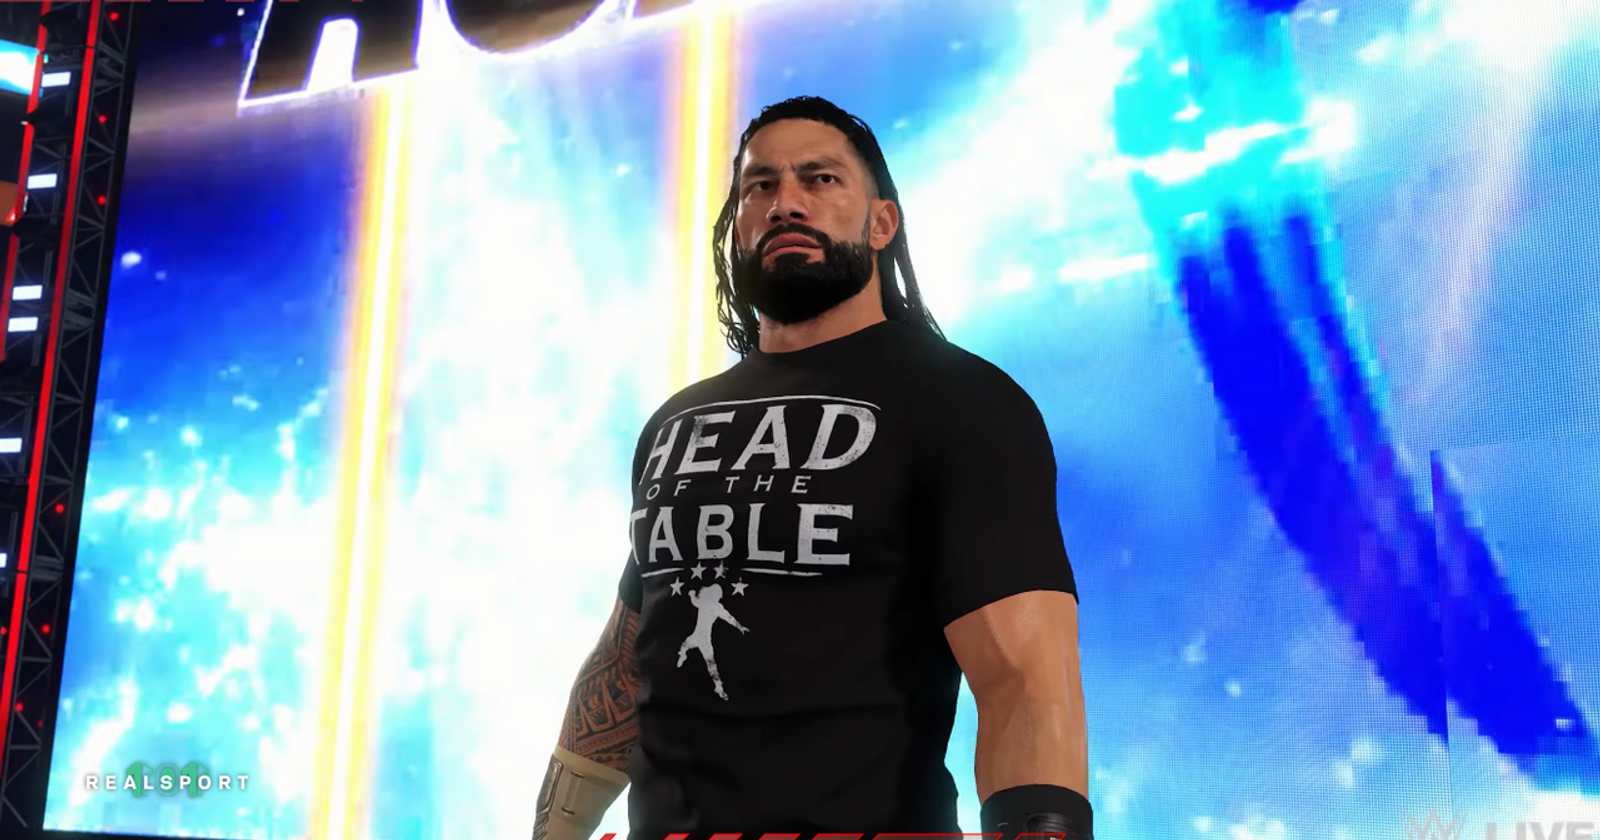 We may not have gotten Ciampa, but we got someone even better. : r/WWEGames